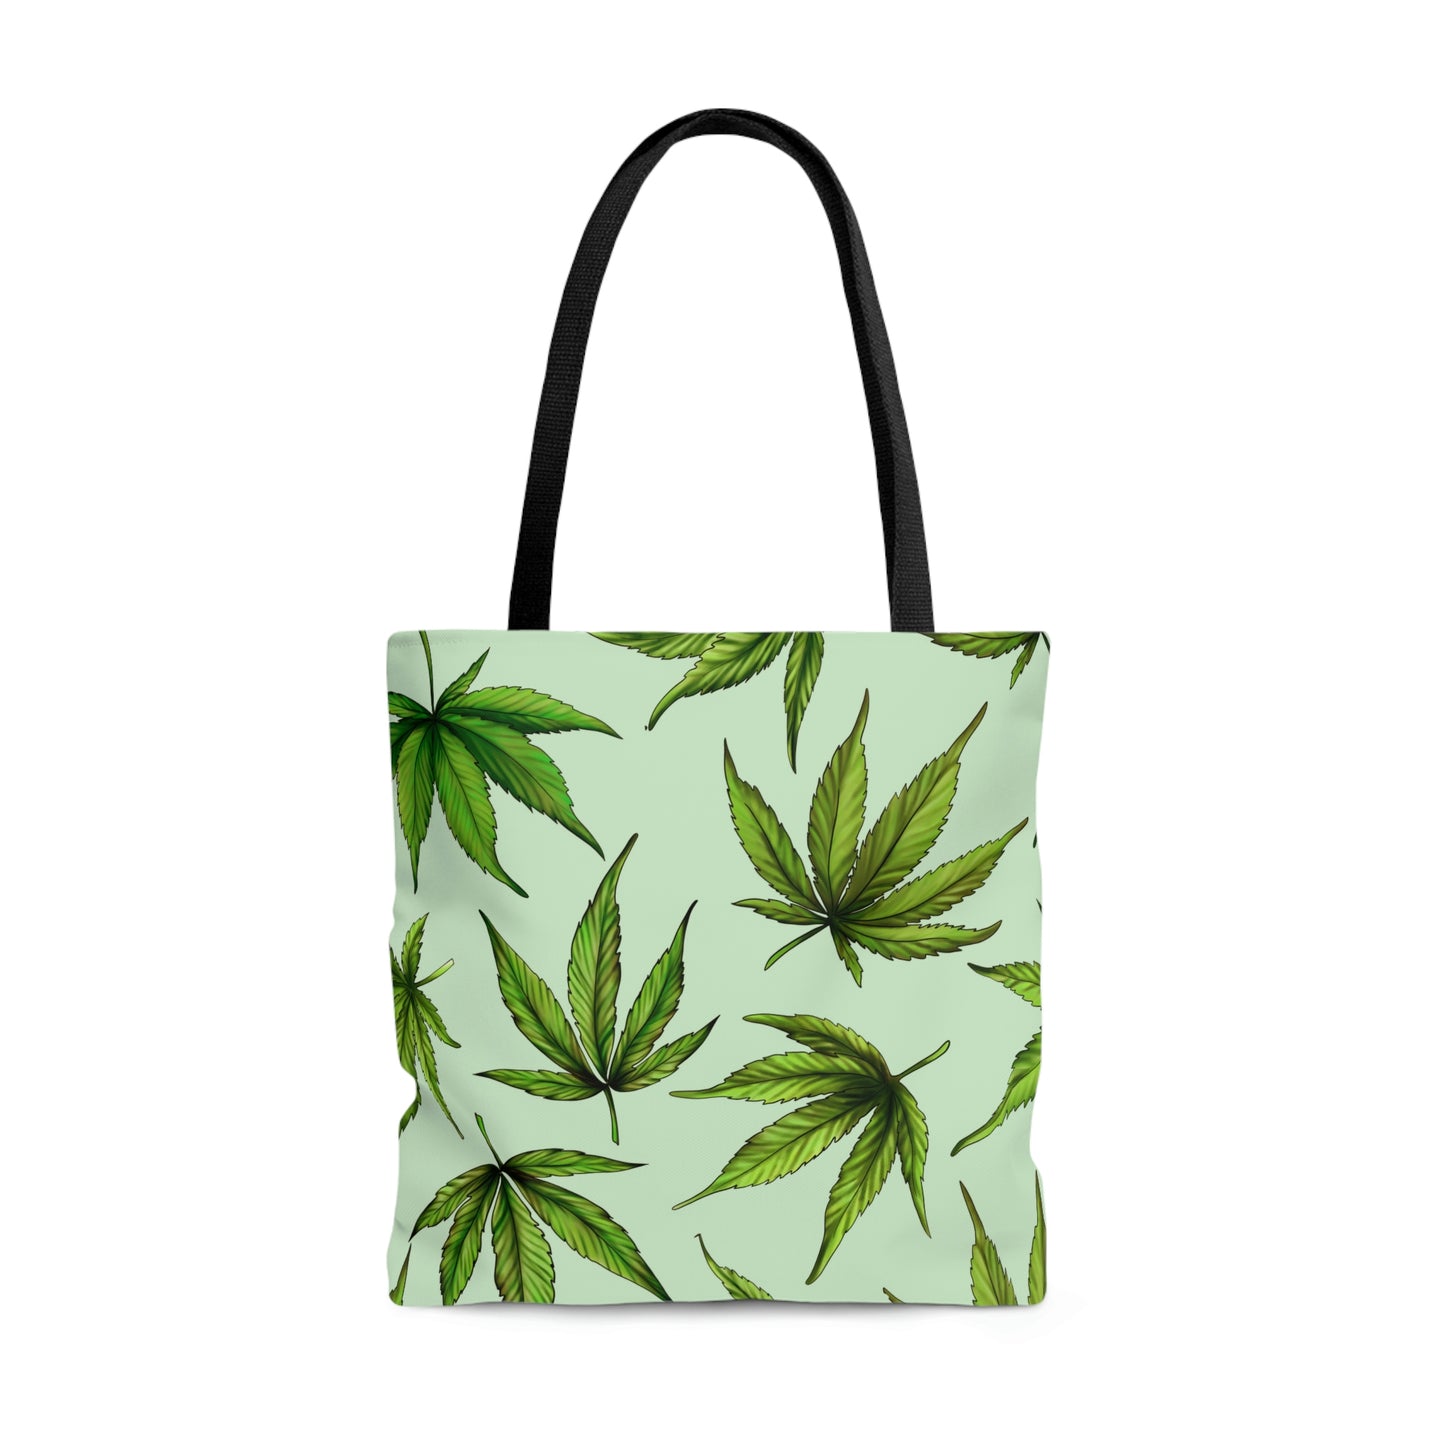 A cinematic view of the Cannabis Leaves Green Tote Bag with ultra cool black carrying straps